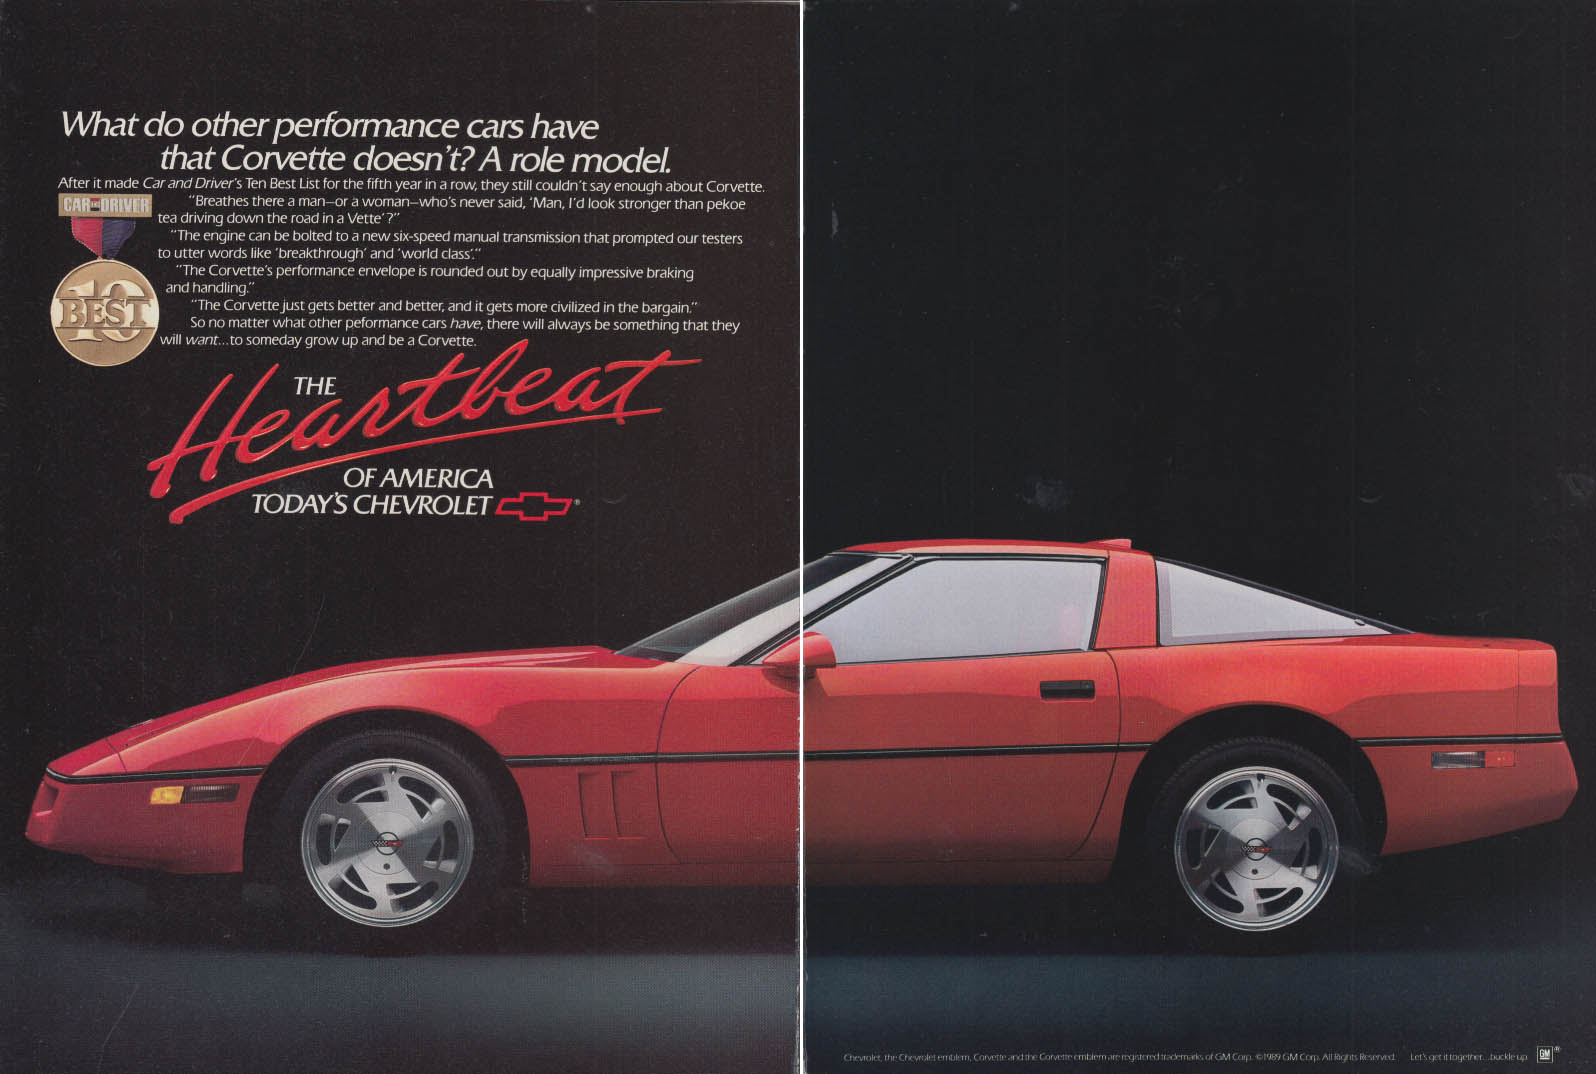 1989 Corvette ZR 1 King Of Hill Sweepstakes Original Print Ad-8.5 x 11"